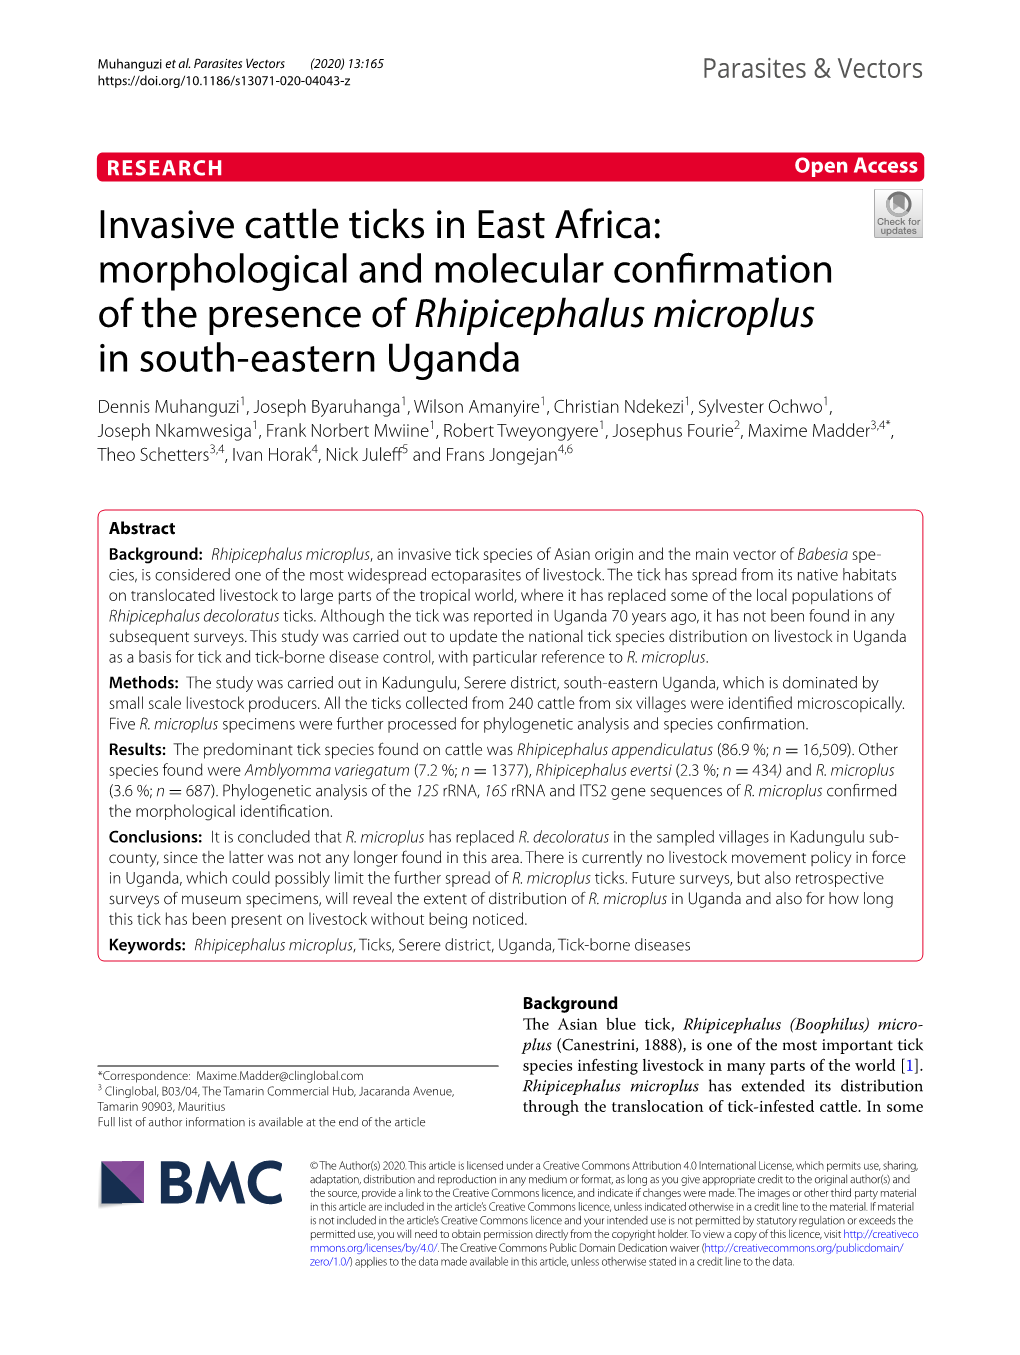 Invasive Cattle Ticks in East Africa: Morphological and Molecular